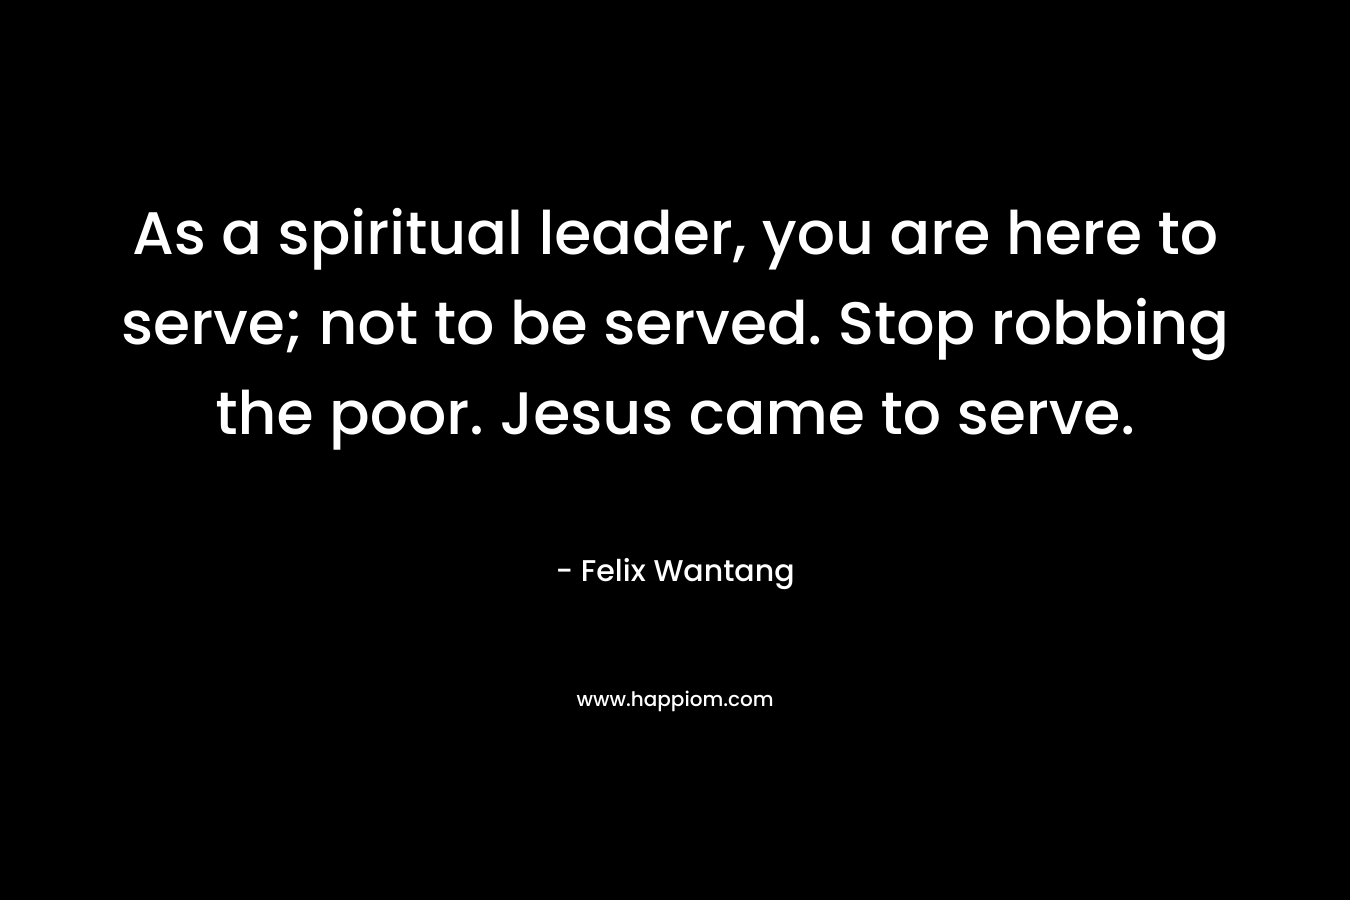 As a spiritual leader, you are here to serve; not to be served. Stop robbing the poor. Jesus came to serve.